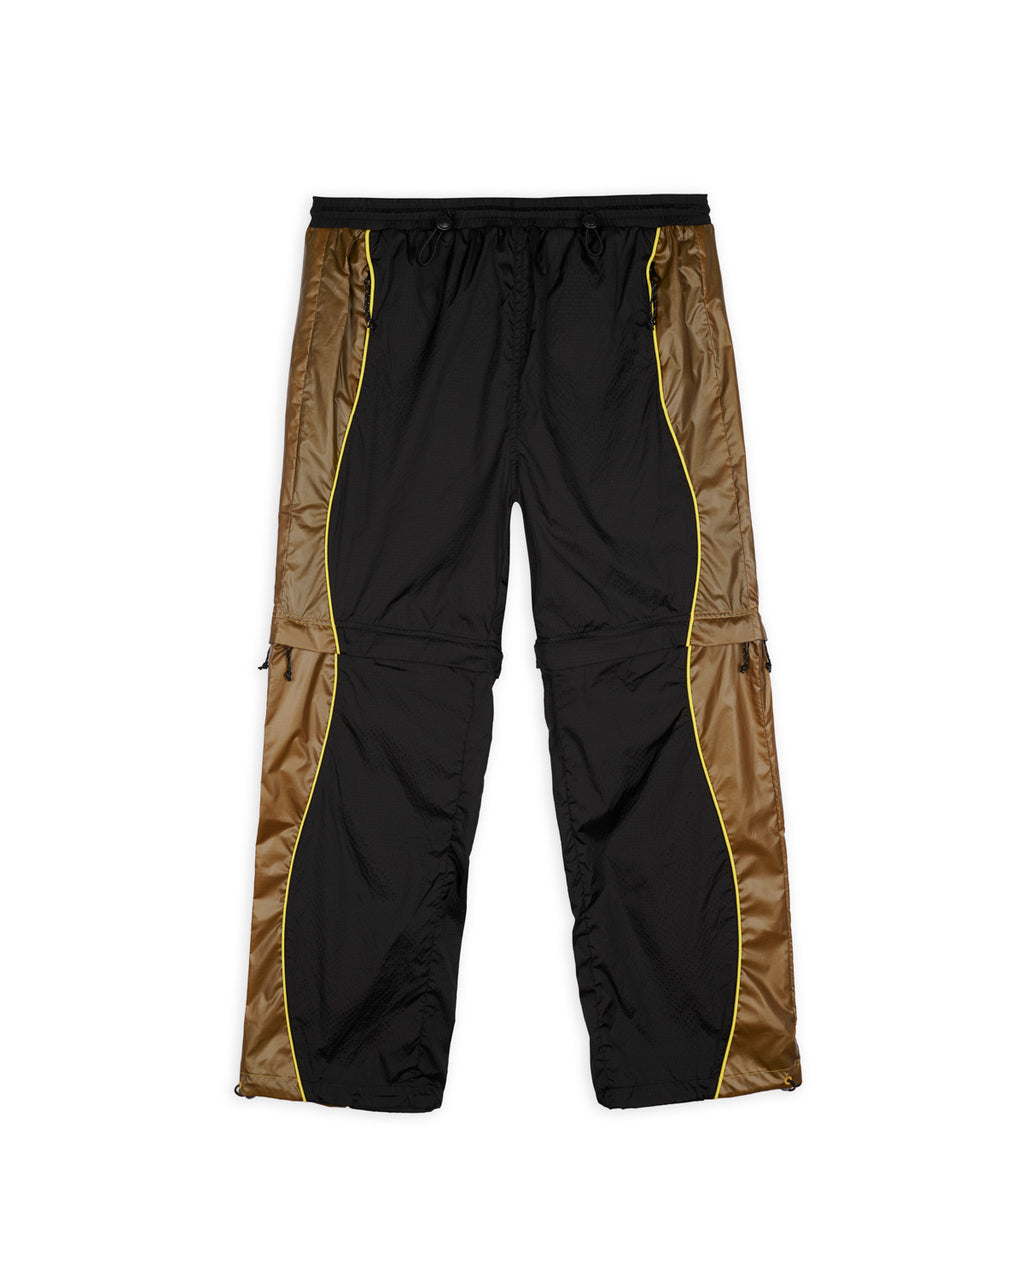 Thermo Heat Zip Off Running Pant - Thermo Reactive